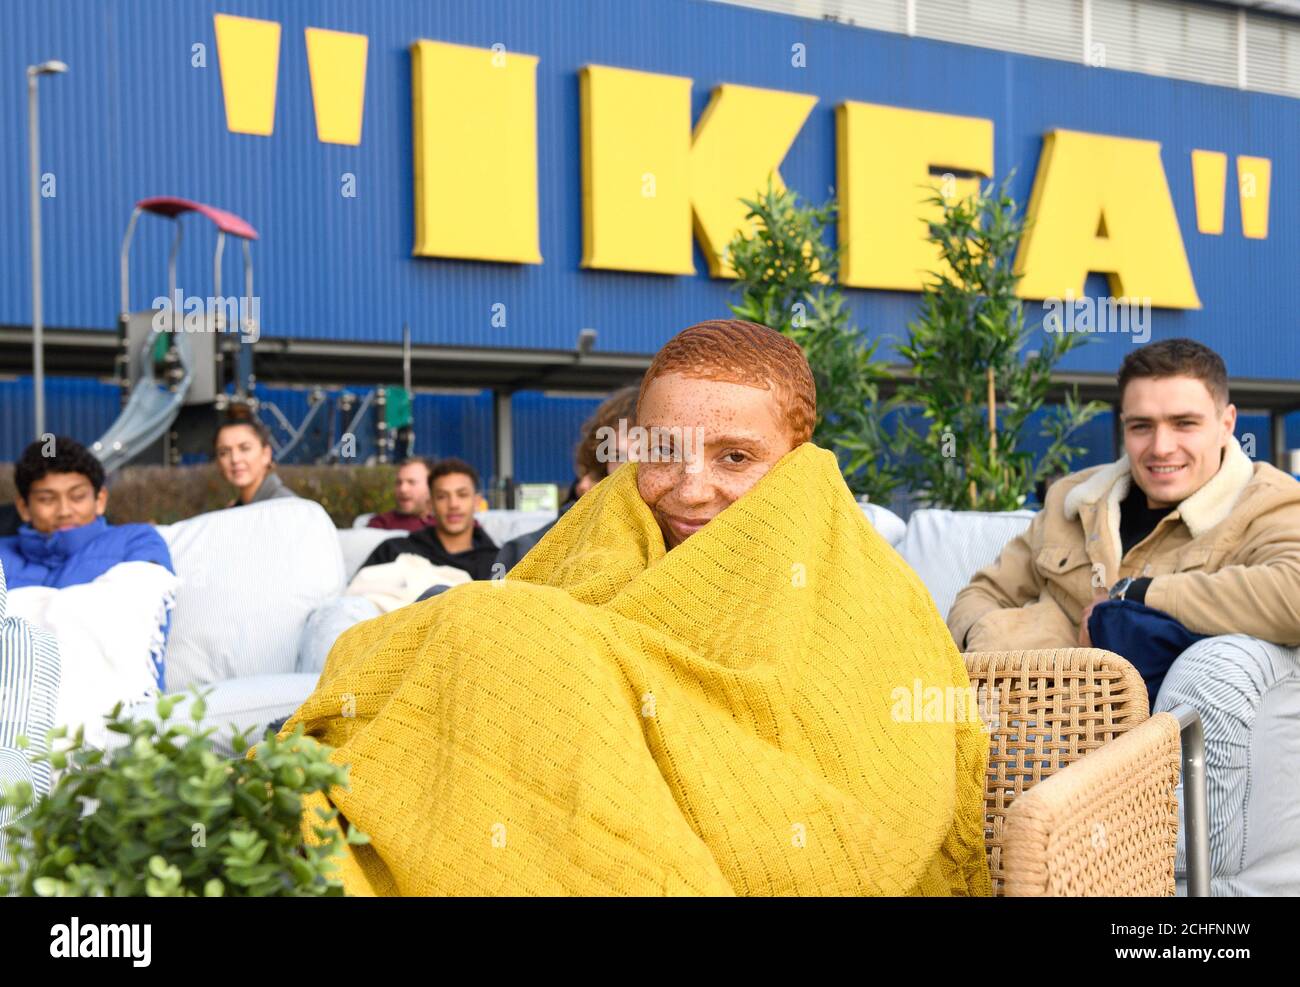 IKEA superfans queue overnight for the launch of the Virgil Abloh